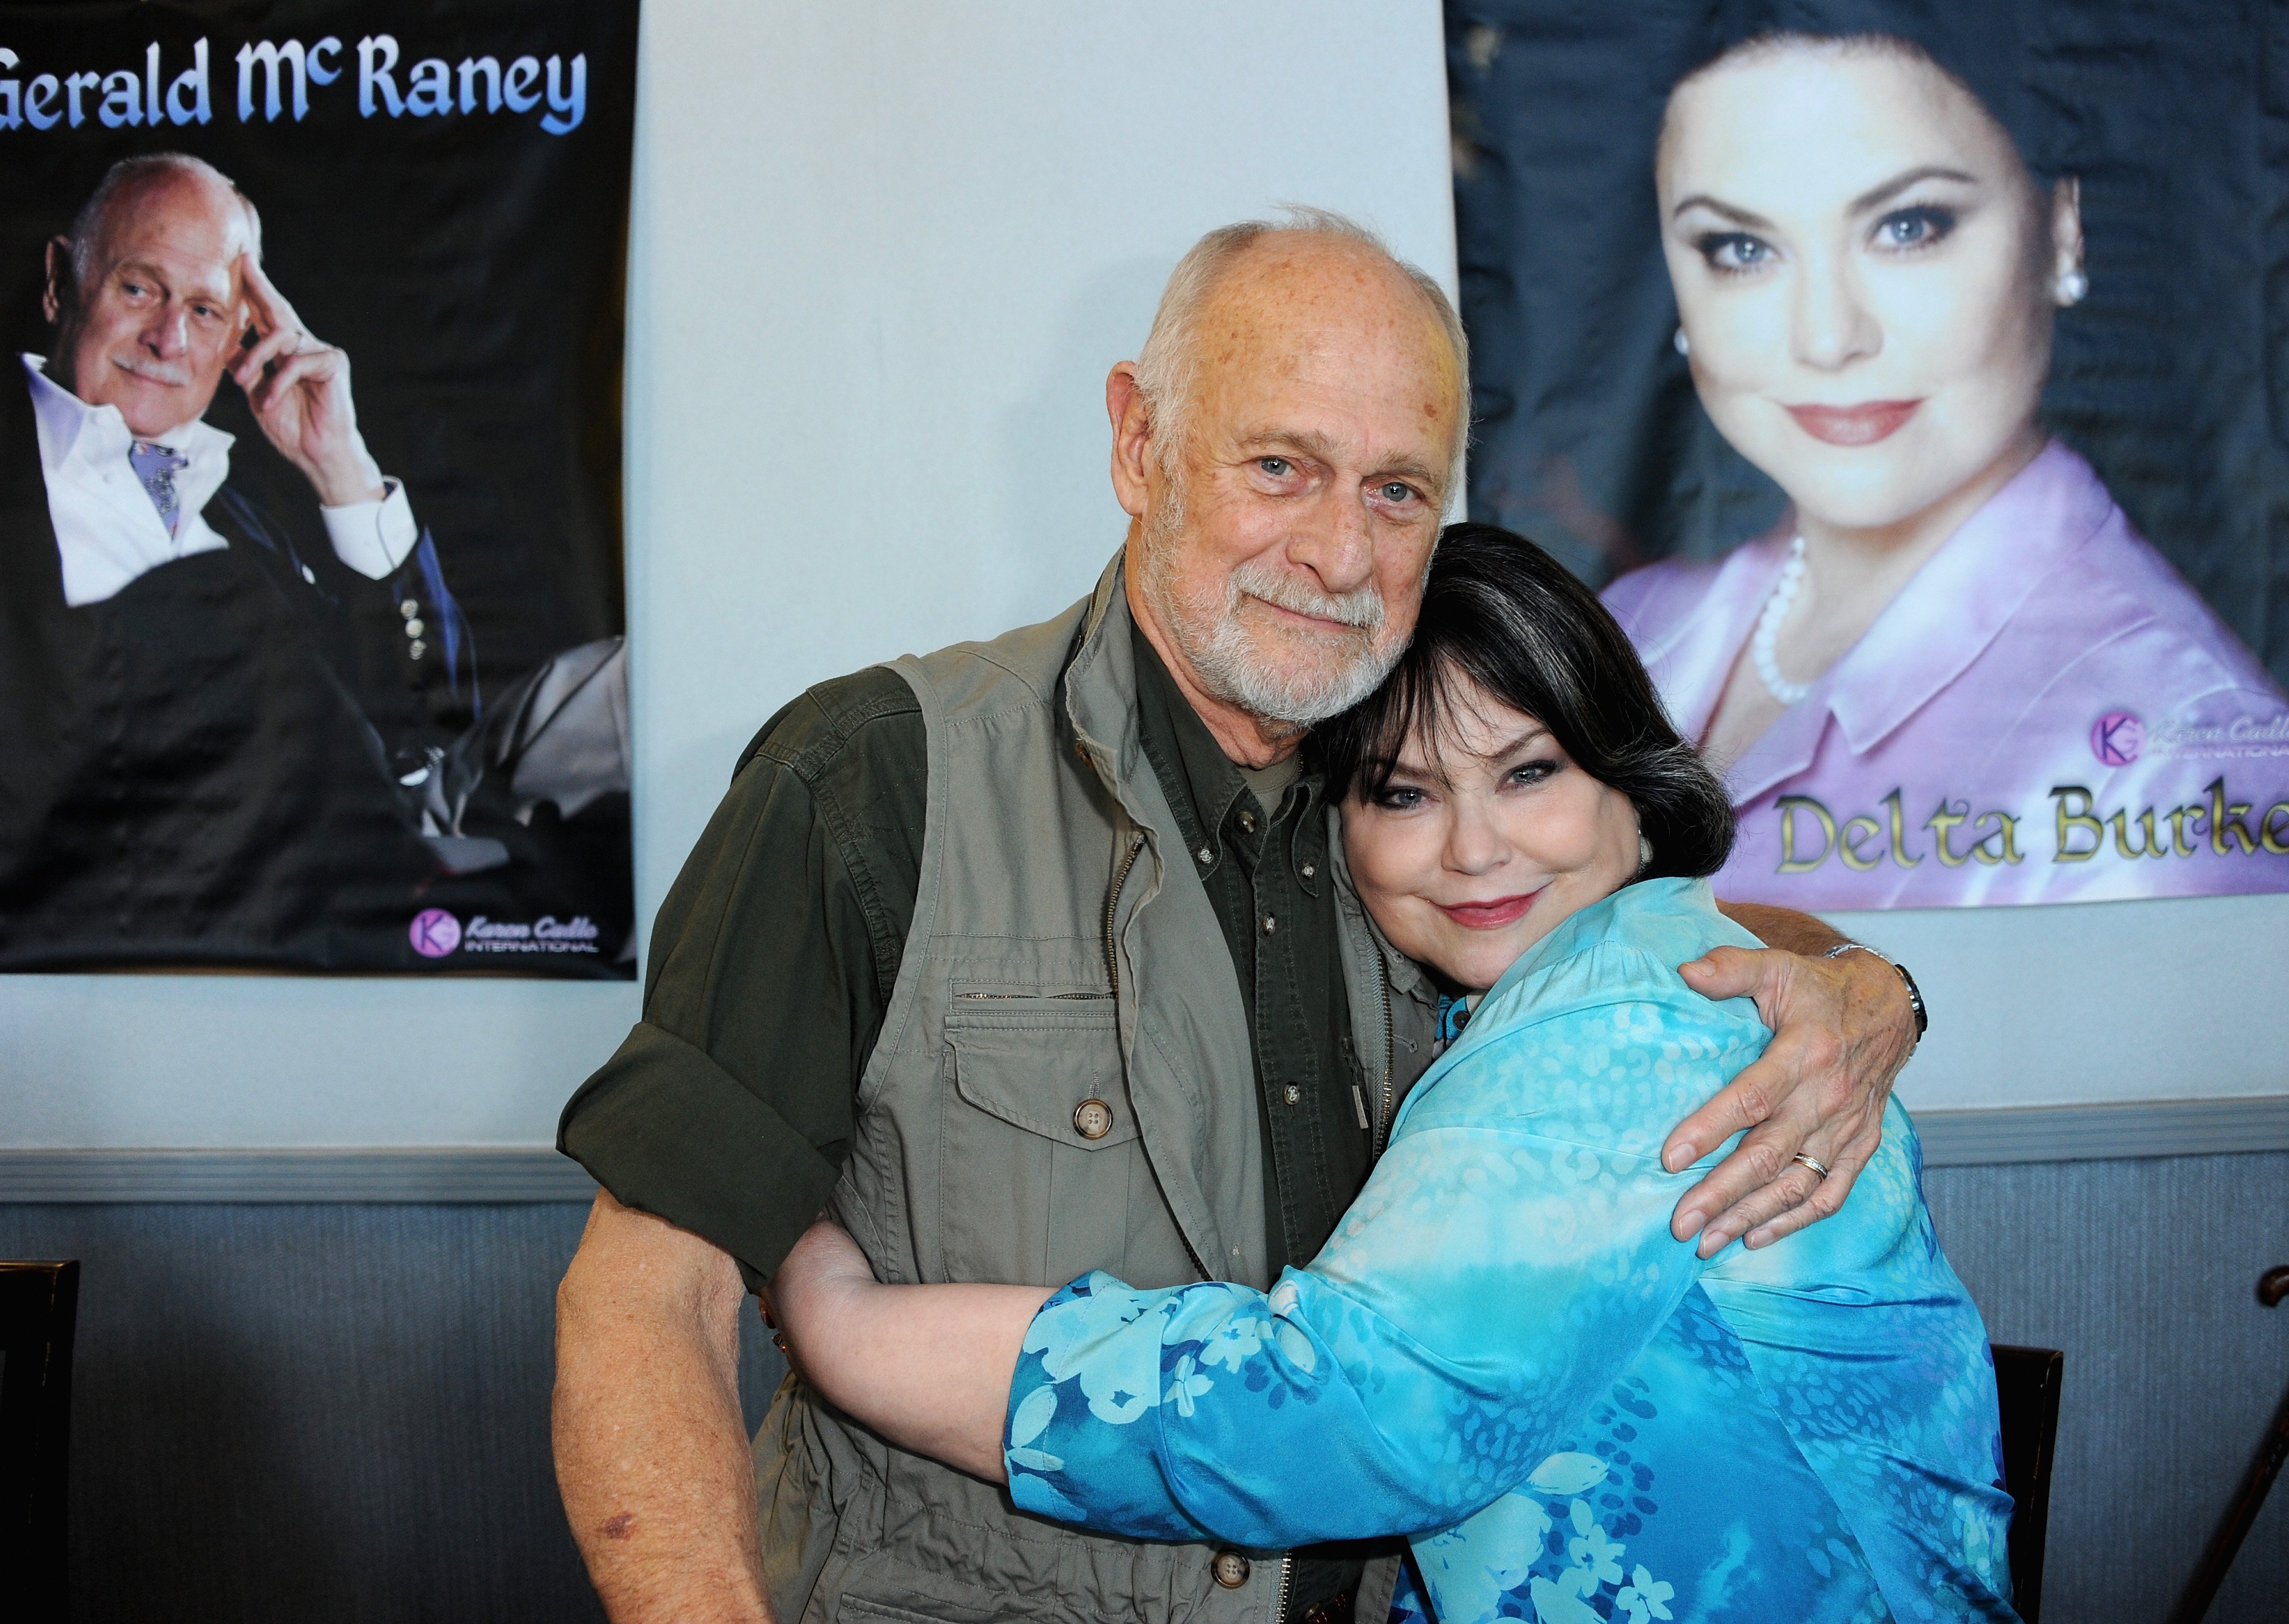 Gerald McRaney and Delta Burke at the Hollywood Show on February 1, 2020, in Burbank, California | Source: Getty Images